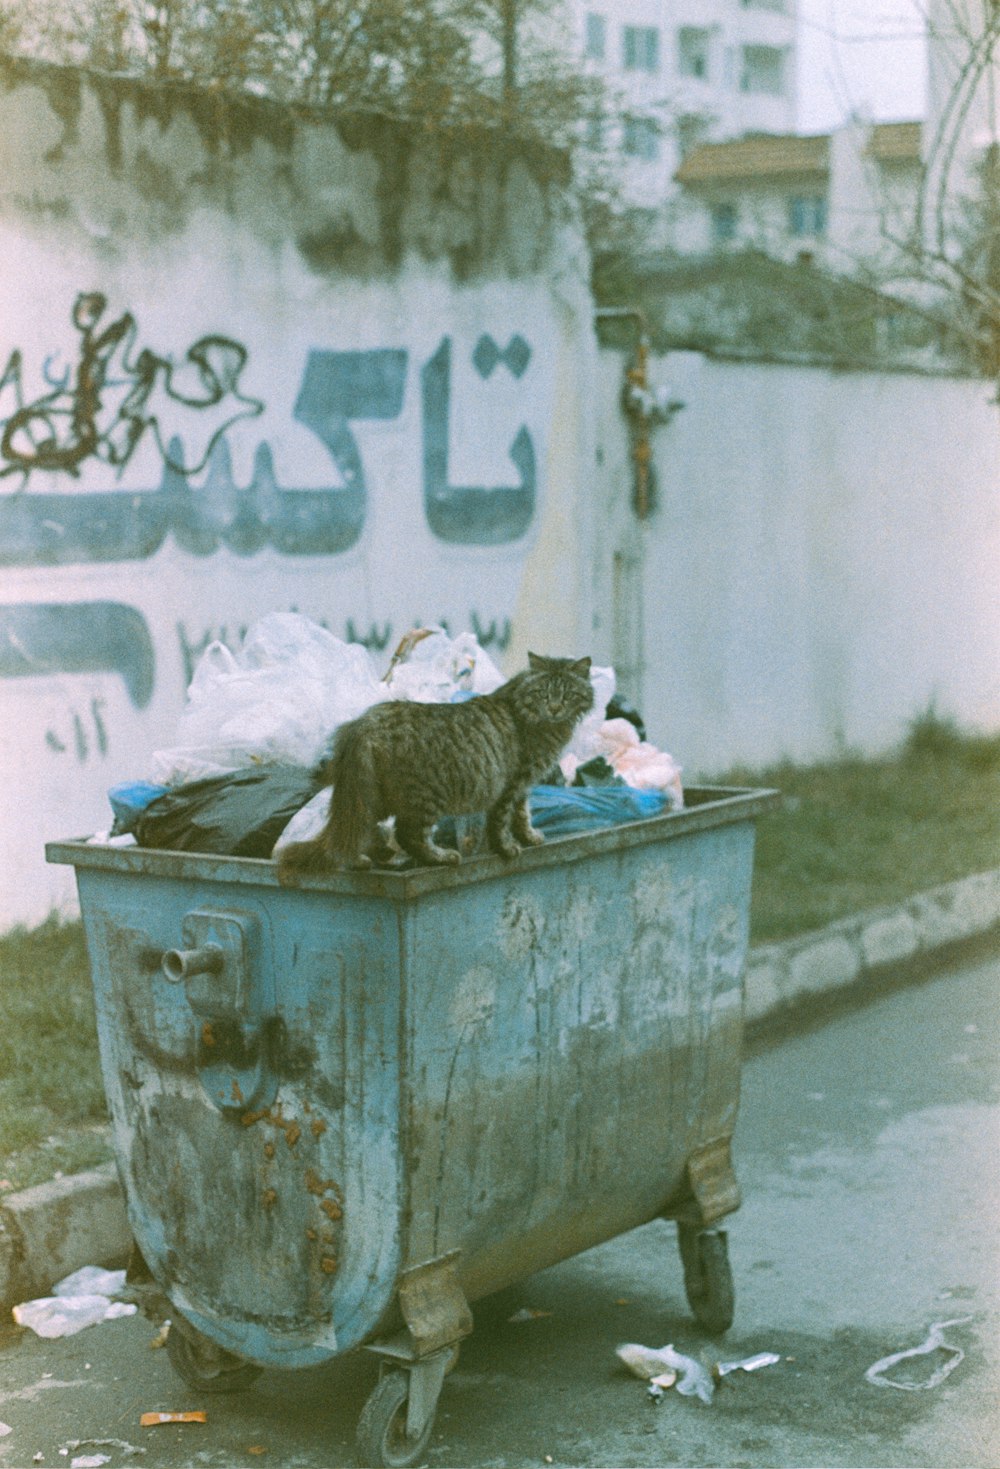 a cat sitting on top of a trash can